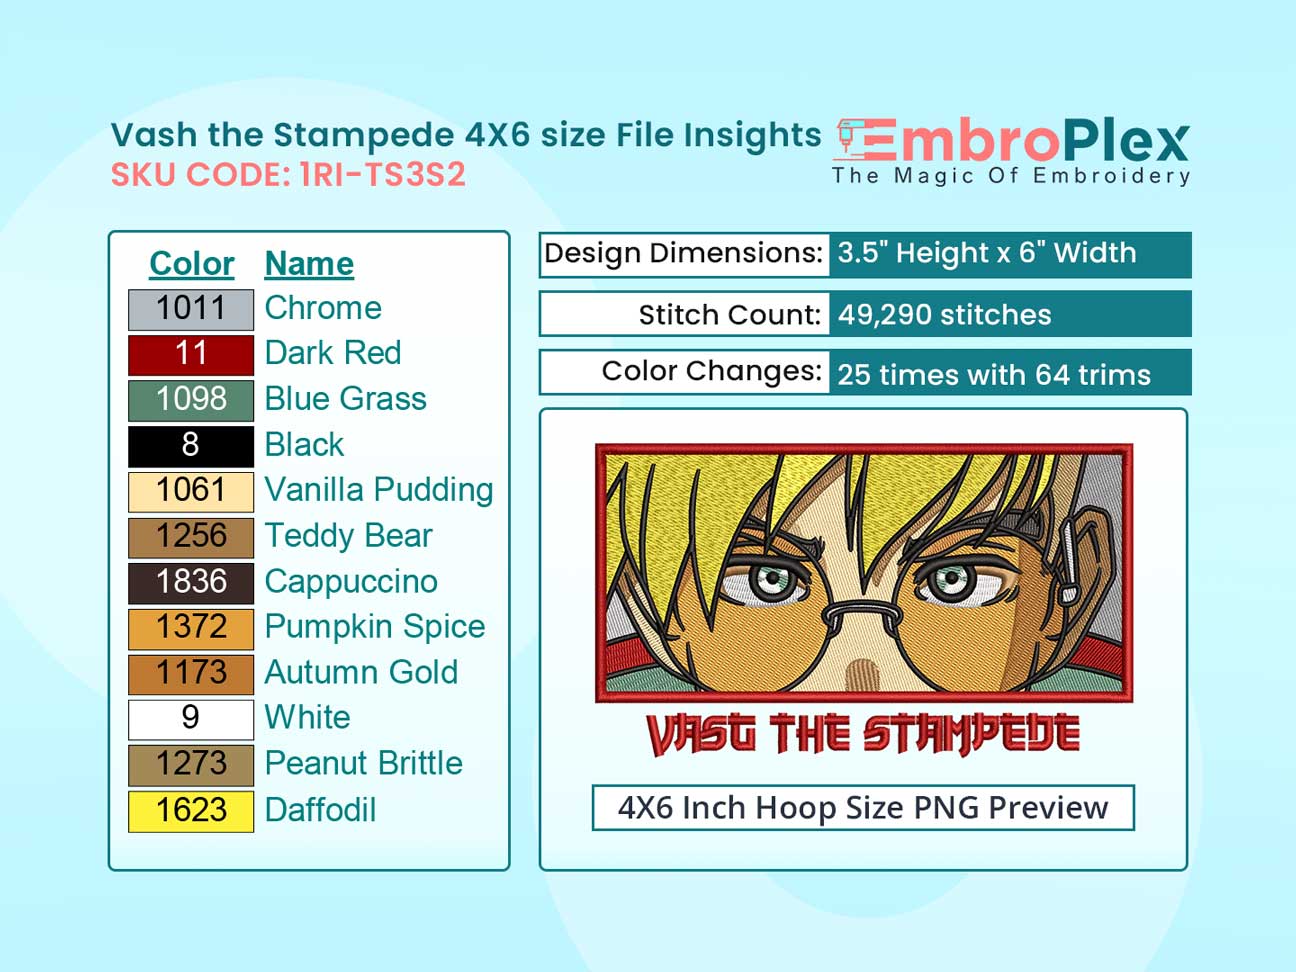 Anime-Inspired Vash the Stampede Embroidery Design File - 4x6 Inch hoop Size Variation overview image